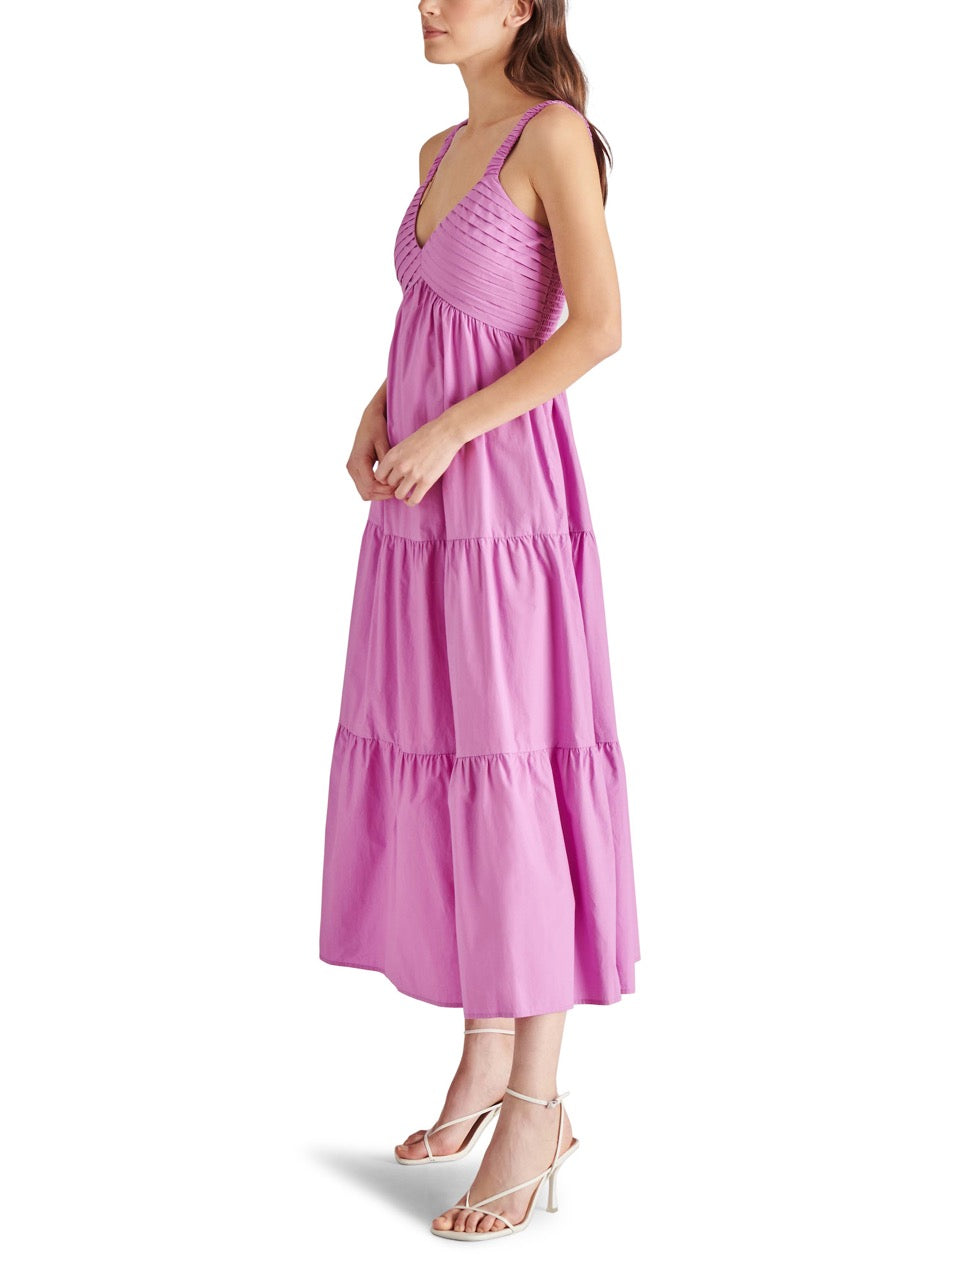 steve madden eliora solid sleeveless maxi dress in berry-side view